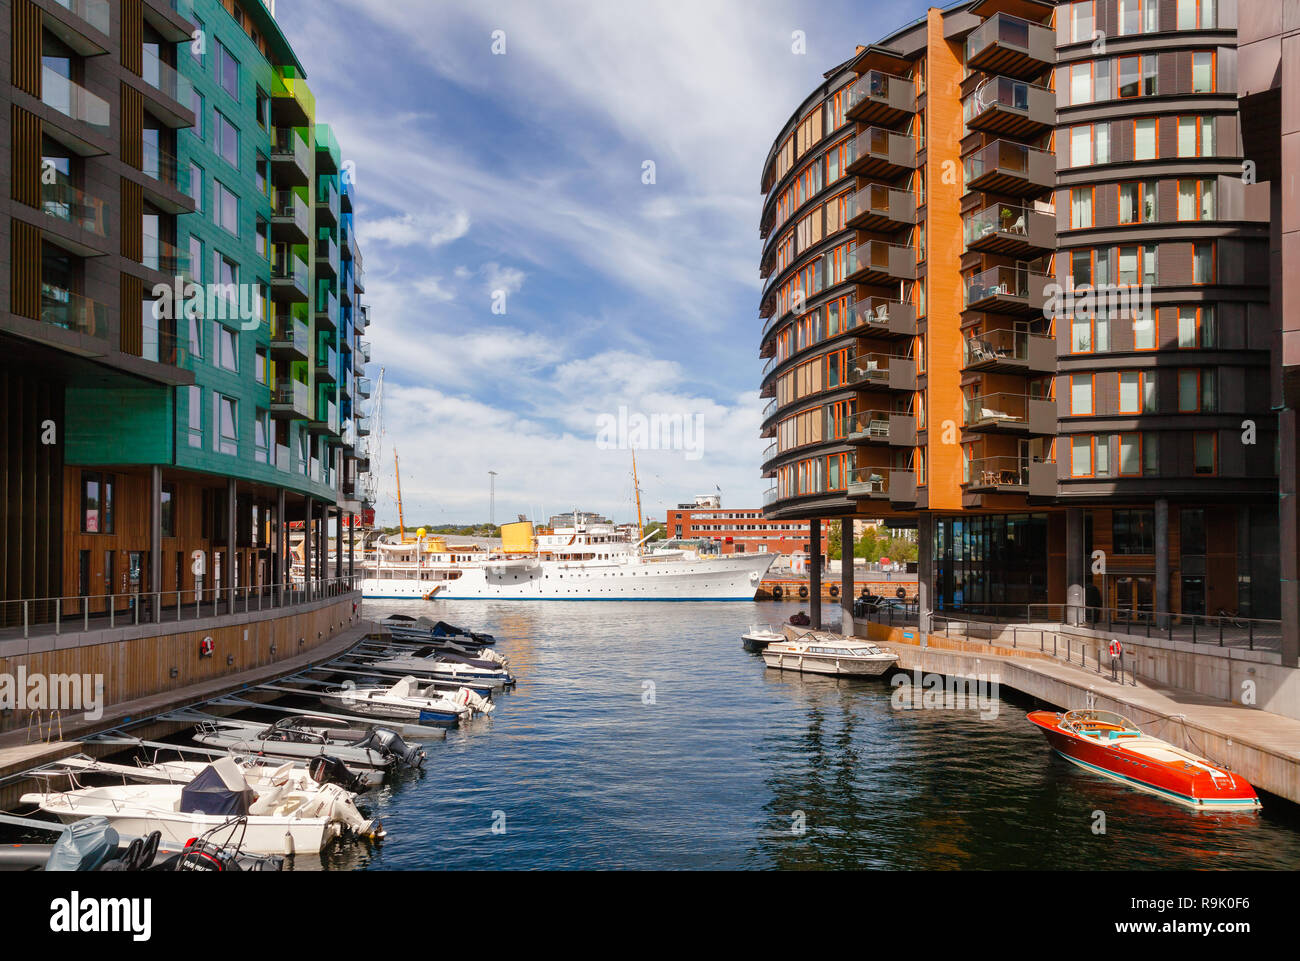 OSLO, NORWAY - JULY 23, 2018: Modern scandinavian architecture at renovated Tjuvholmen waterfront district. HNoMY Norge Royal Yacht of the King of Nor Stock Photo